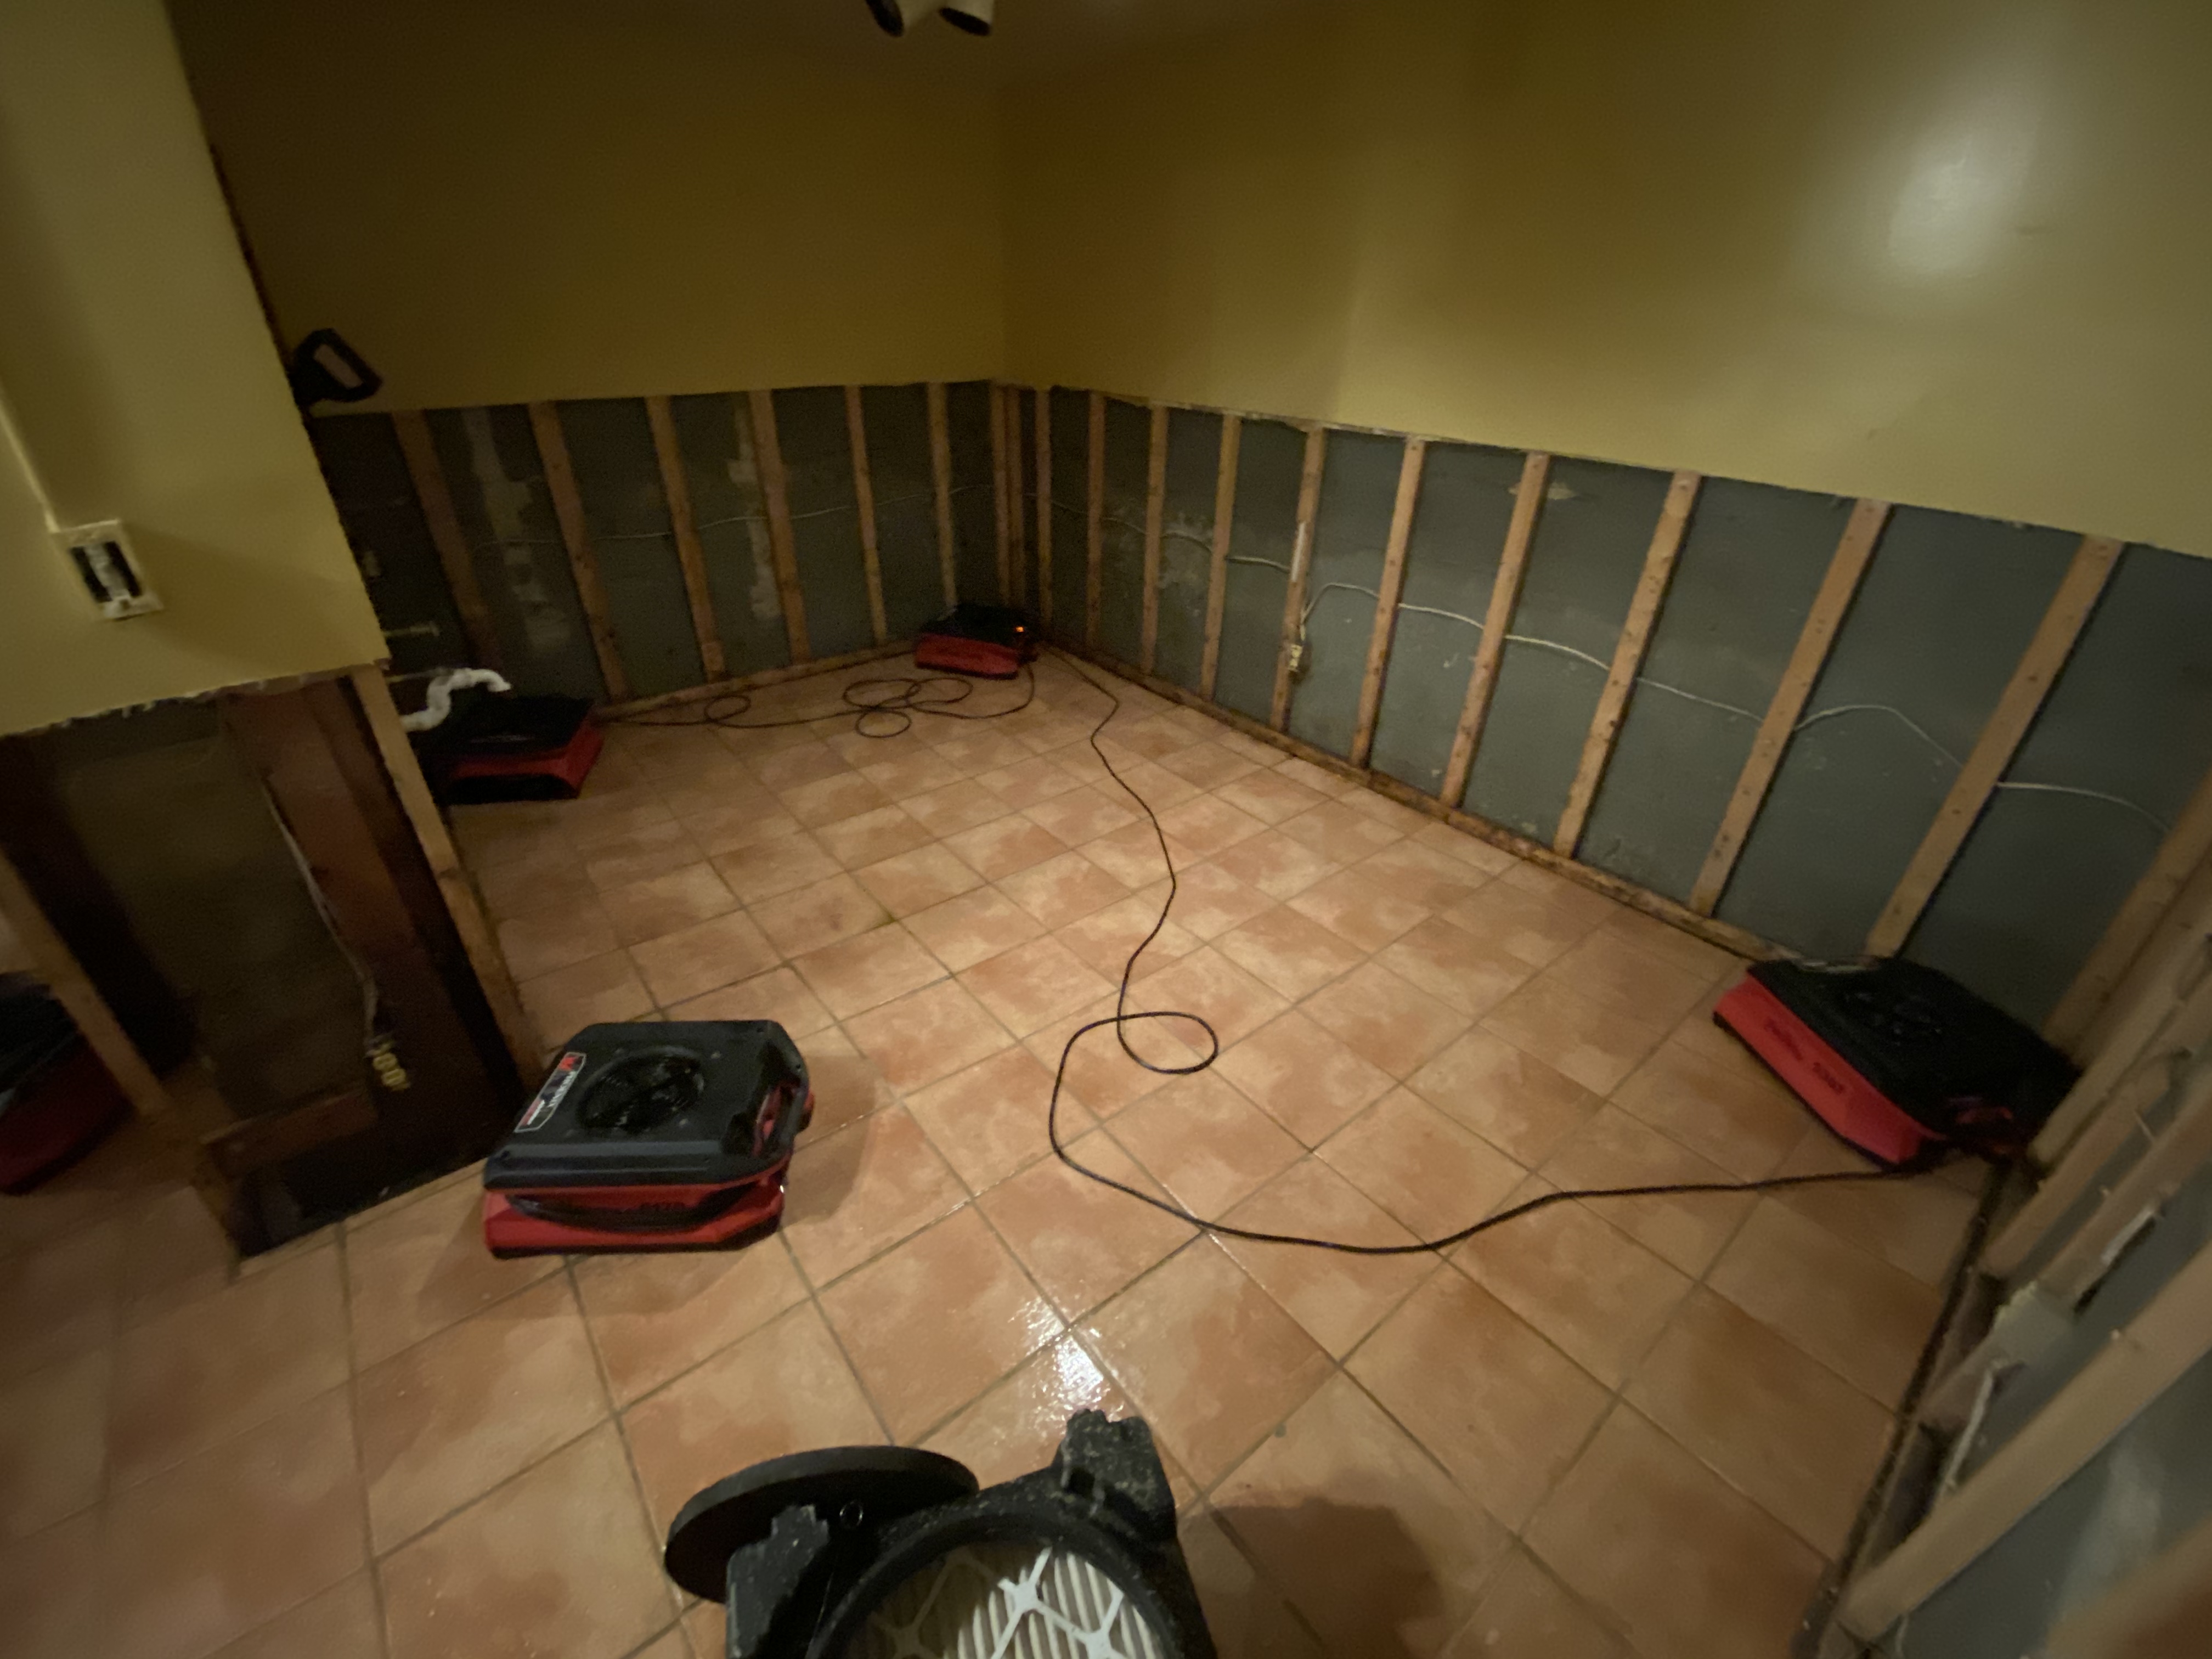 Photo of a basement that has been cleaned